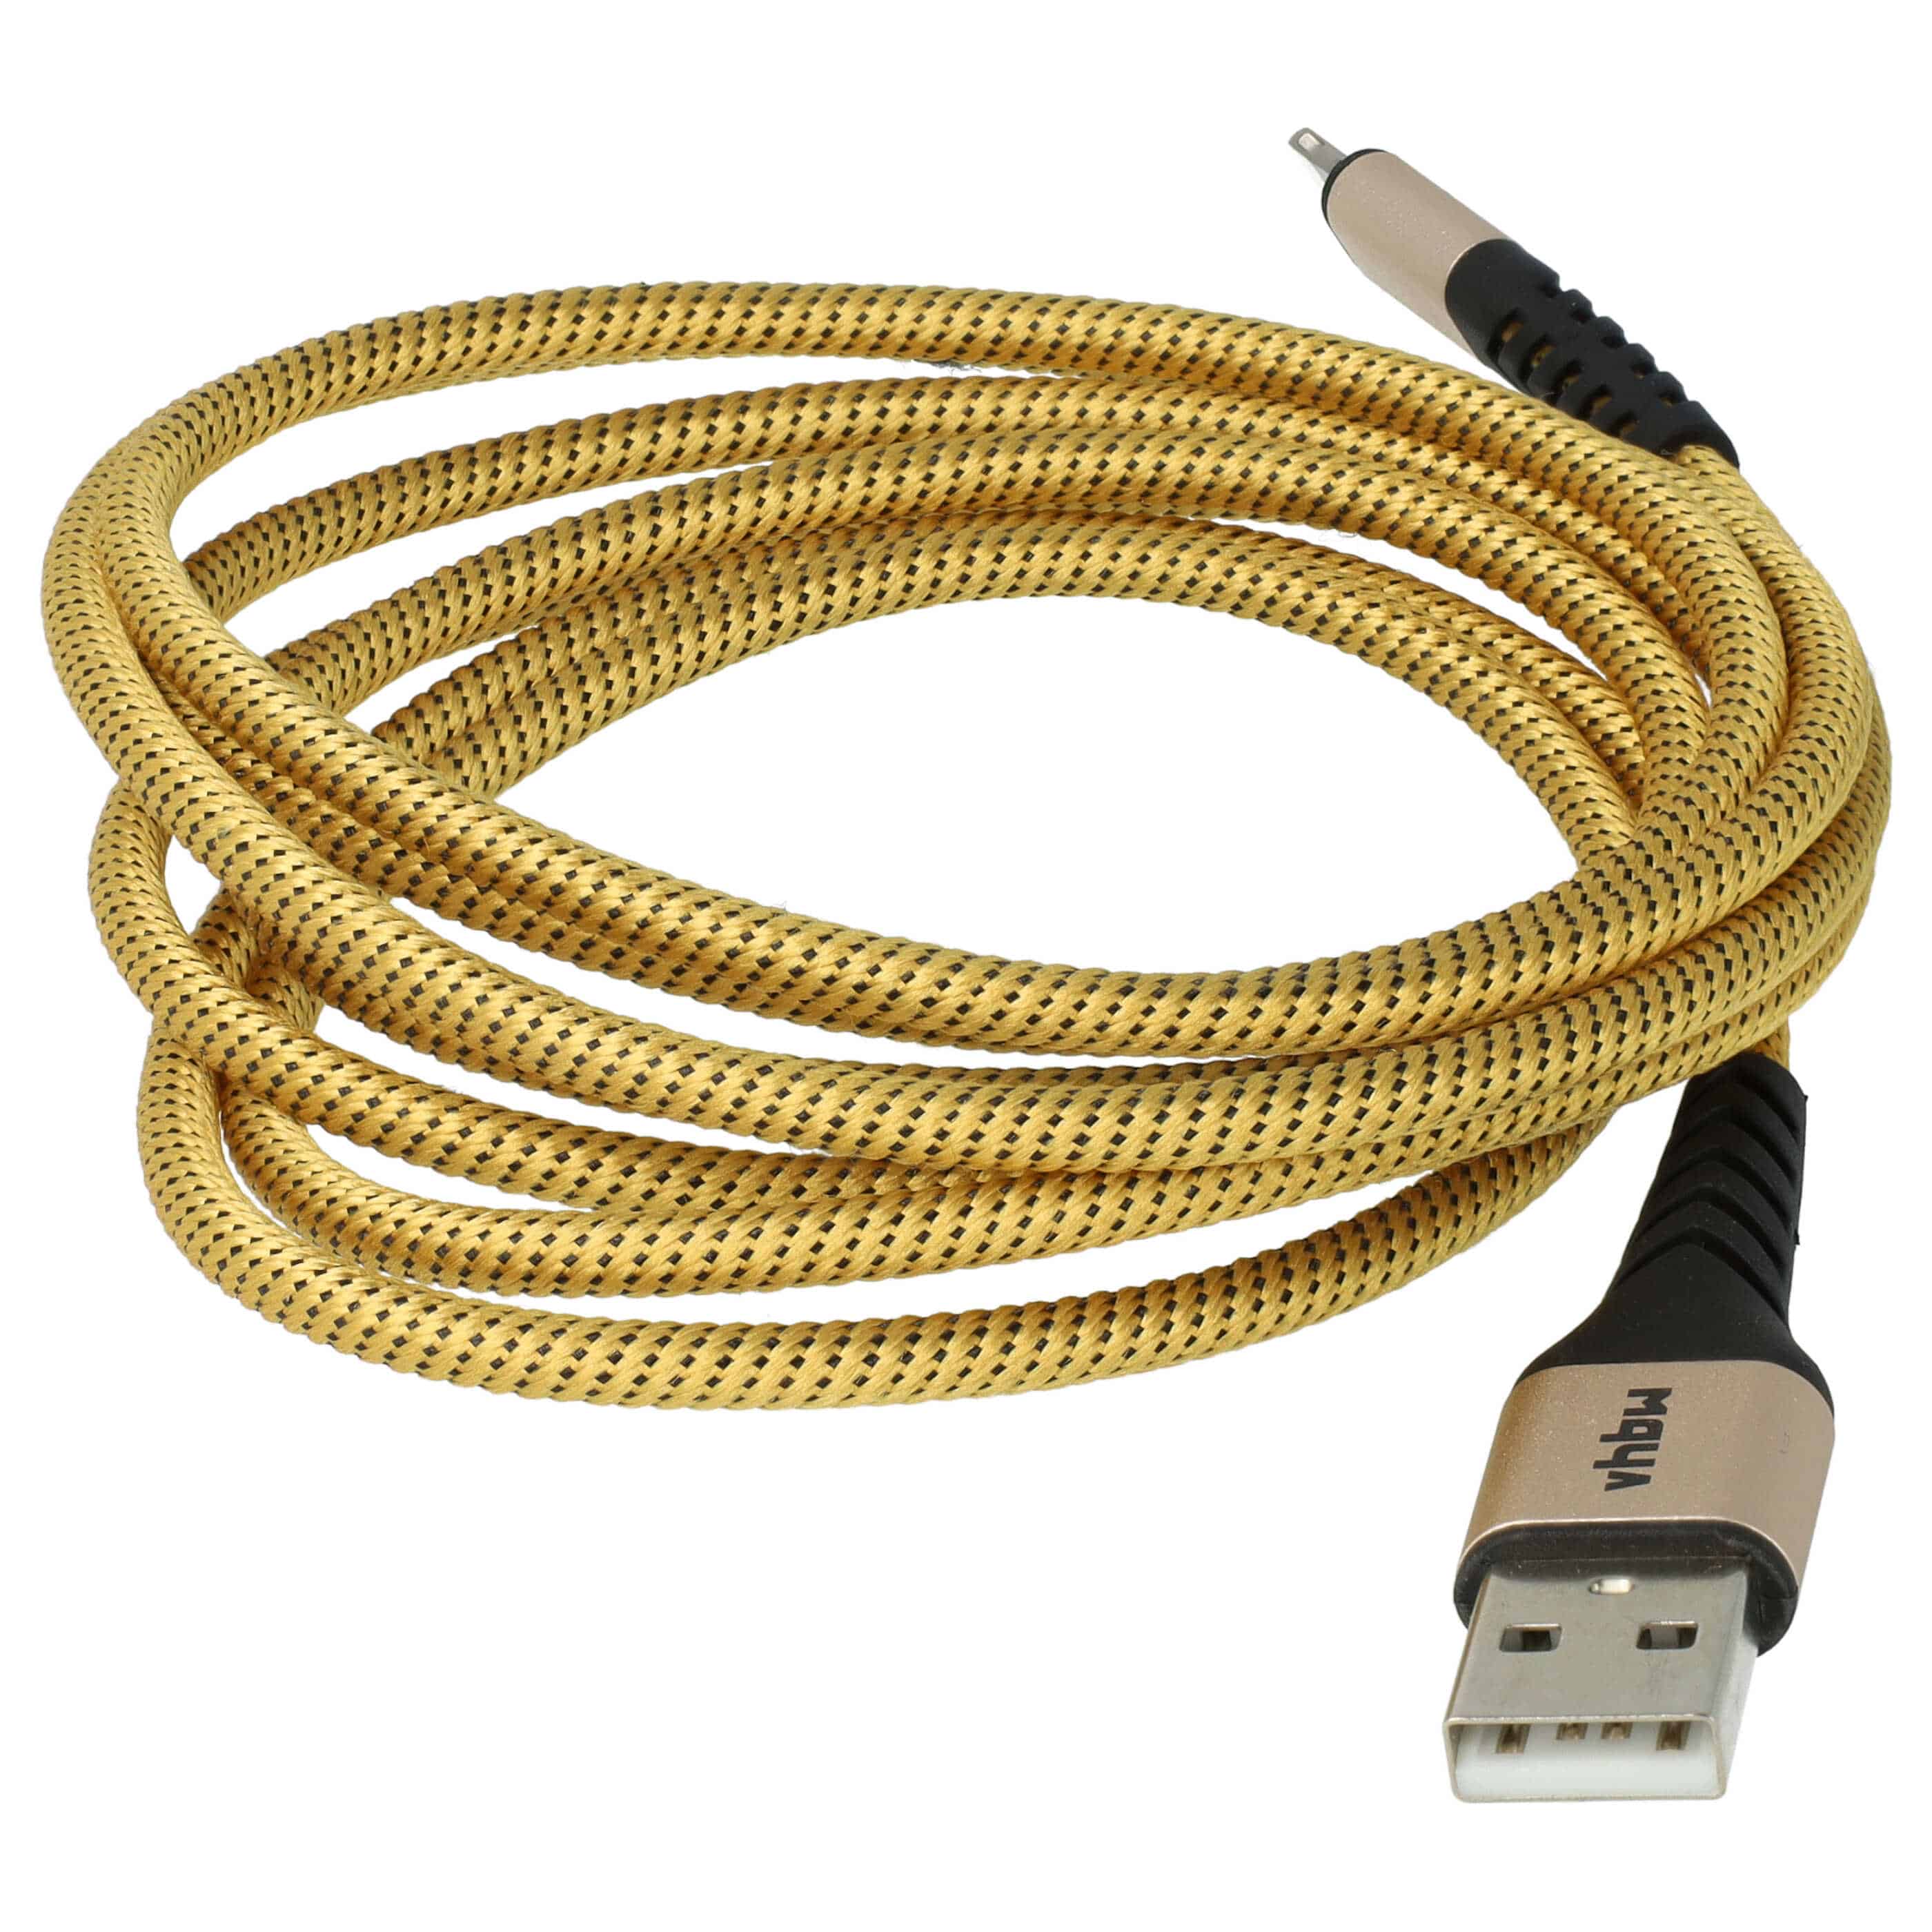 2x Cable Lightning to USB A suitable for 1.Generation iOS Device - yellow/black, 180cm